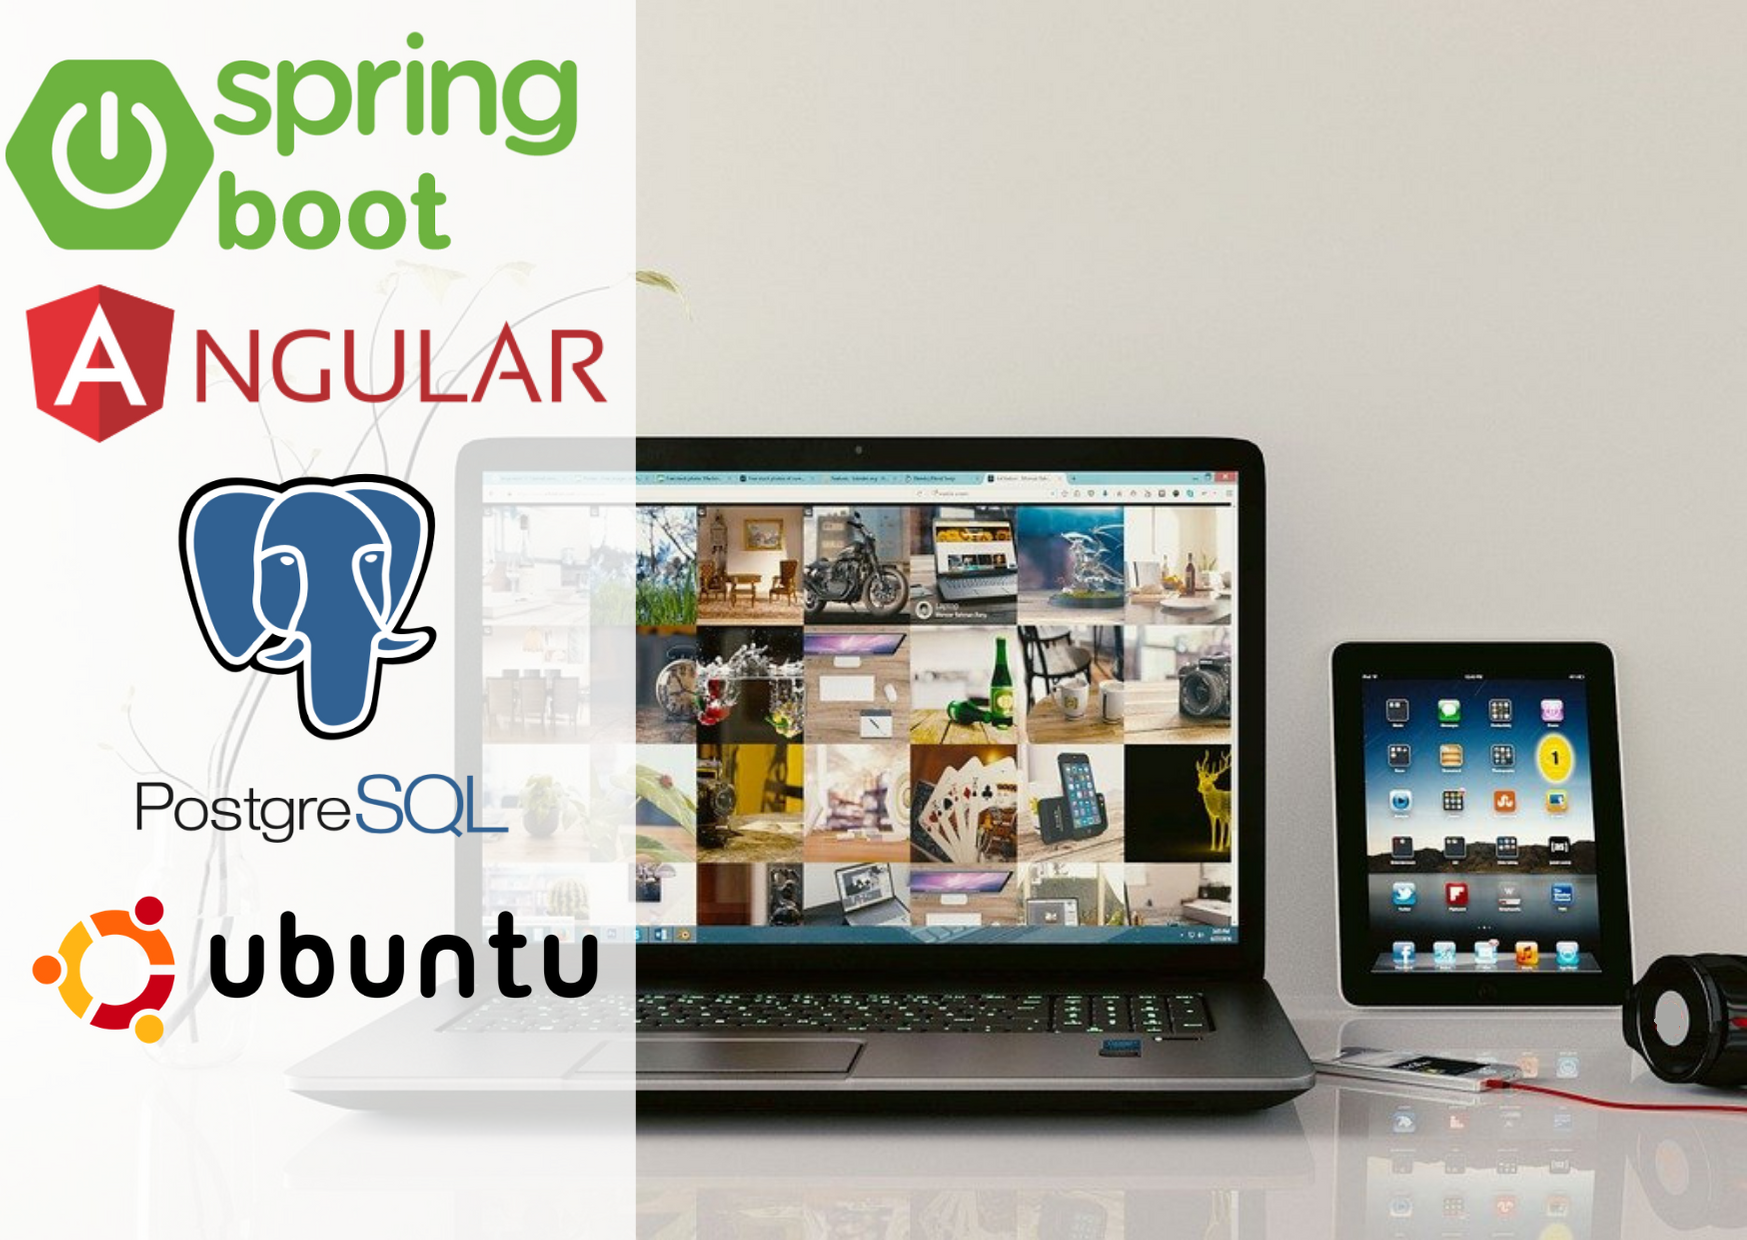 How to deploy a Spring Boot – Angular application on Ubuntu server